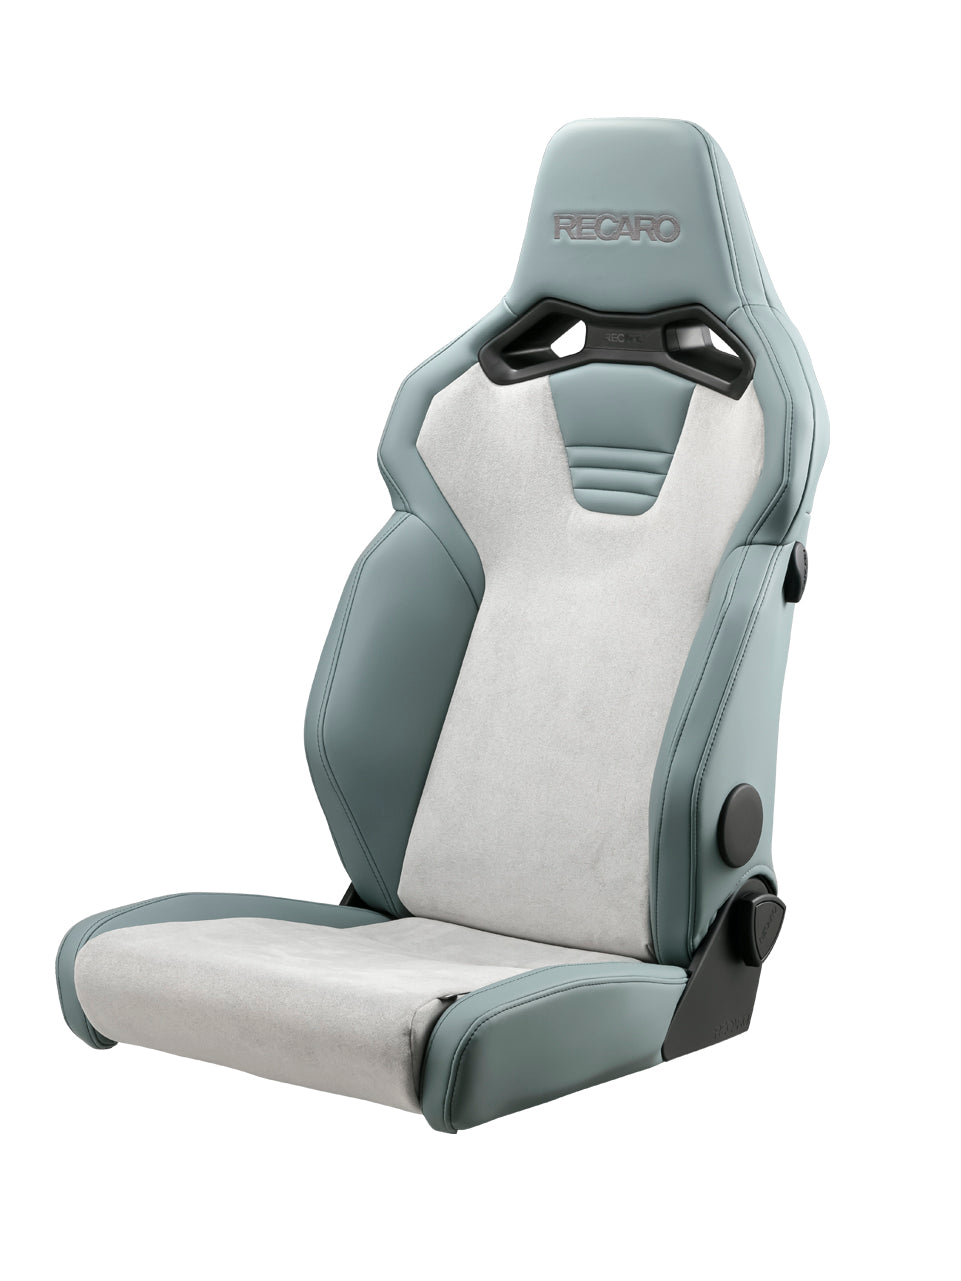 RECARO SR-C UT100H A R MG SG ARTIFICIAL LEATHER SURGE GRAY COLOR AND ULTRA SUEDE MELANGE GRAY COLOR SEAT ARMREST ATTACHEBLE FOR  81-121.29.648-0